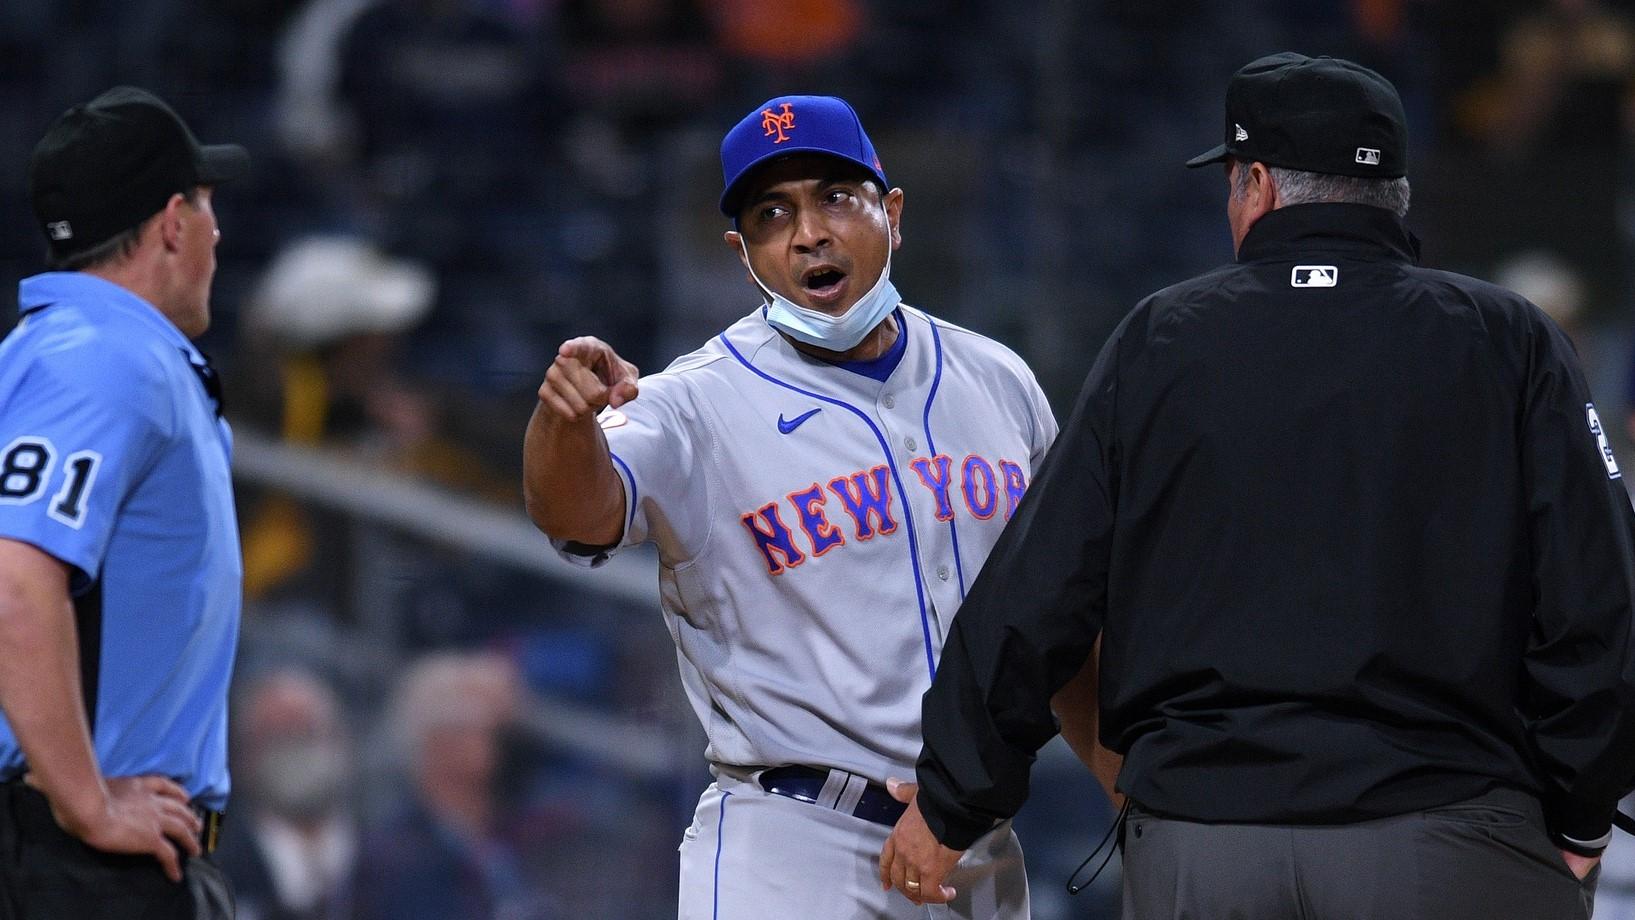 Caption: Jun 4, 2021; San Diego, California, USA; New York Mets manager Luis Rojas (center) reacts after being ejected by home plate umpire Quinn Wolcott (81) during the ninth inning against the San Diego Padres at Petco Park. / Orlando Ramirez-USA TODAY Sports